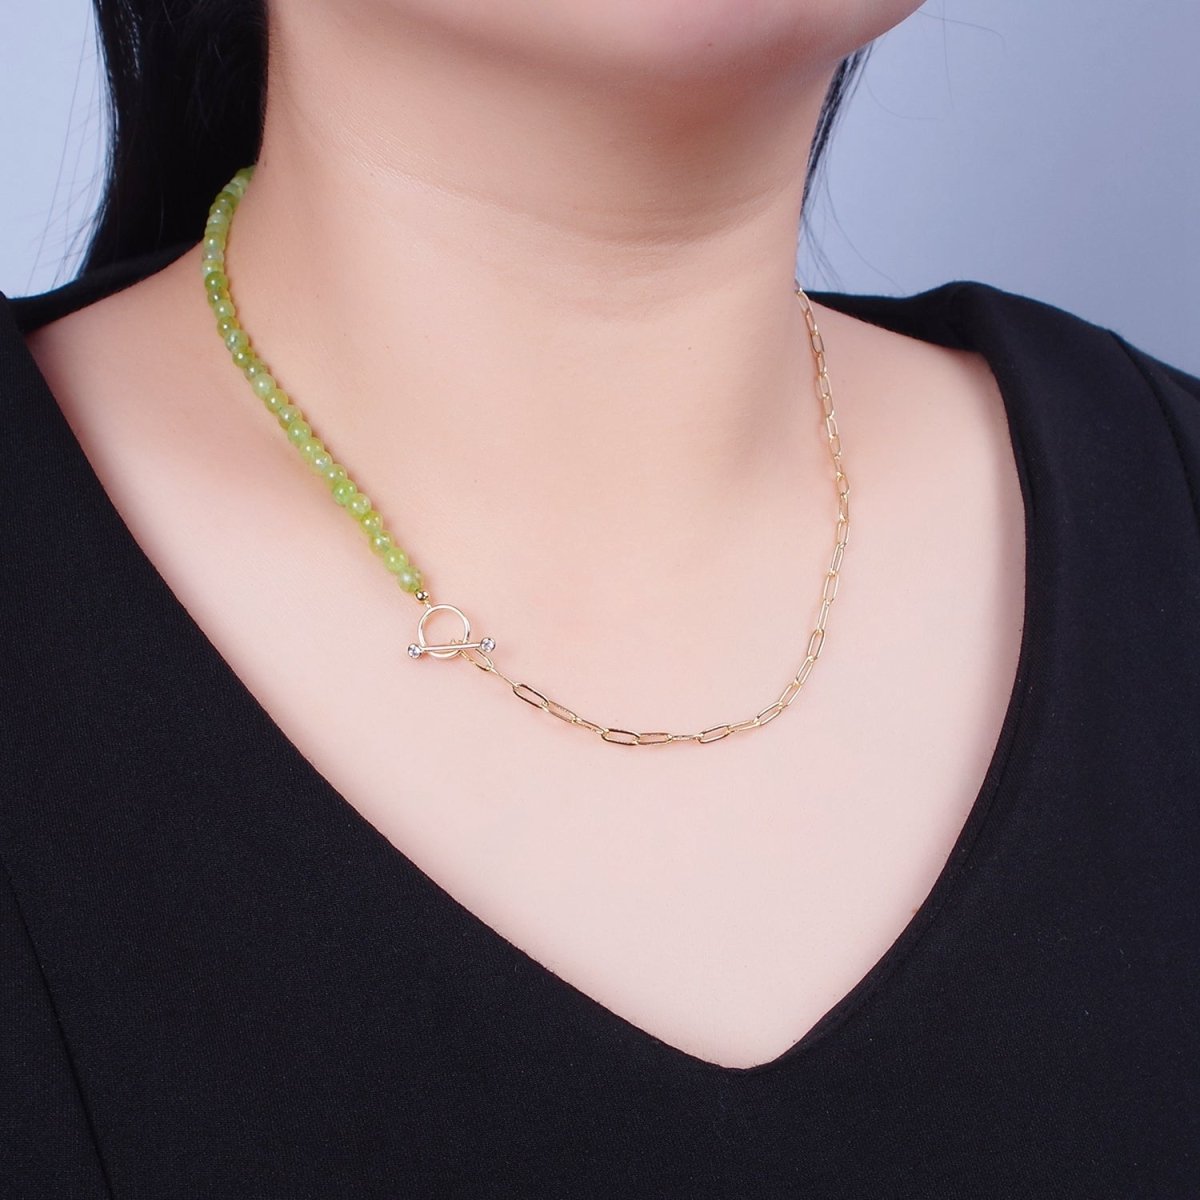 Dainty Half Bead Half Link Chain Necklace, 24k Gold Filled Paperclip Chain with Green Jade Necklace Toggle Clasp | WA-960 Clearance Pricing - DLUXCA